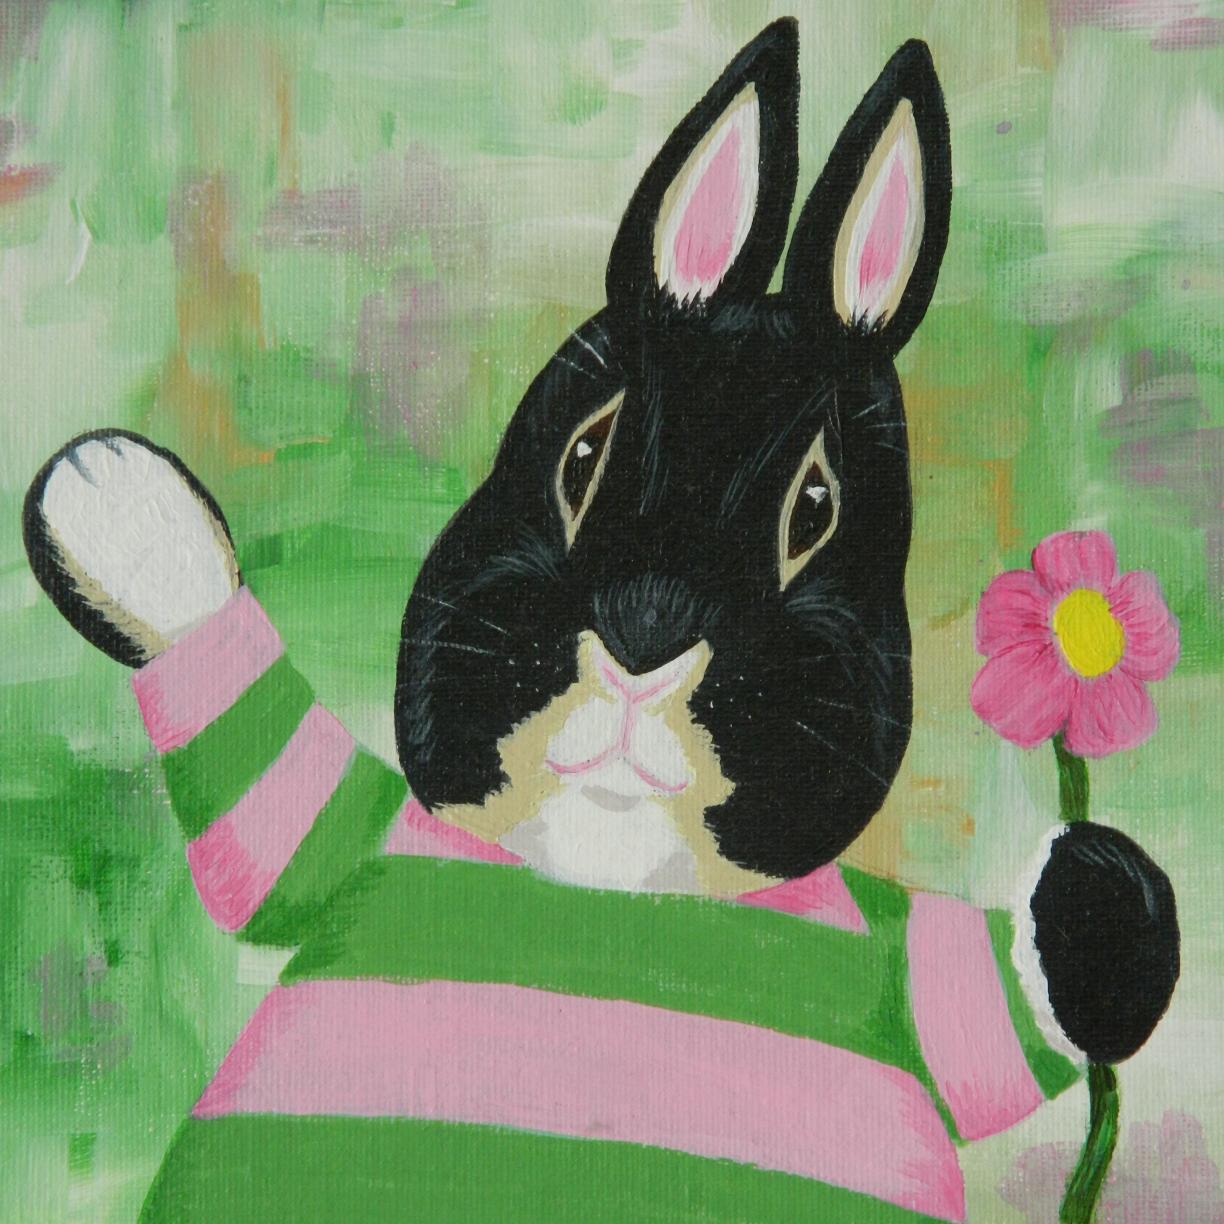 Self employed artist, author and life long bunny lover.
Writes under the pseudonym Ada Rose Leighton.